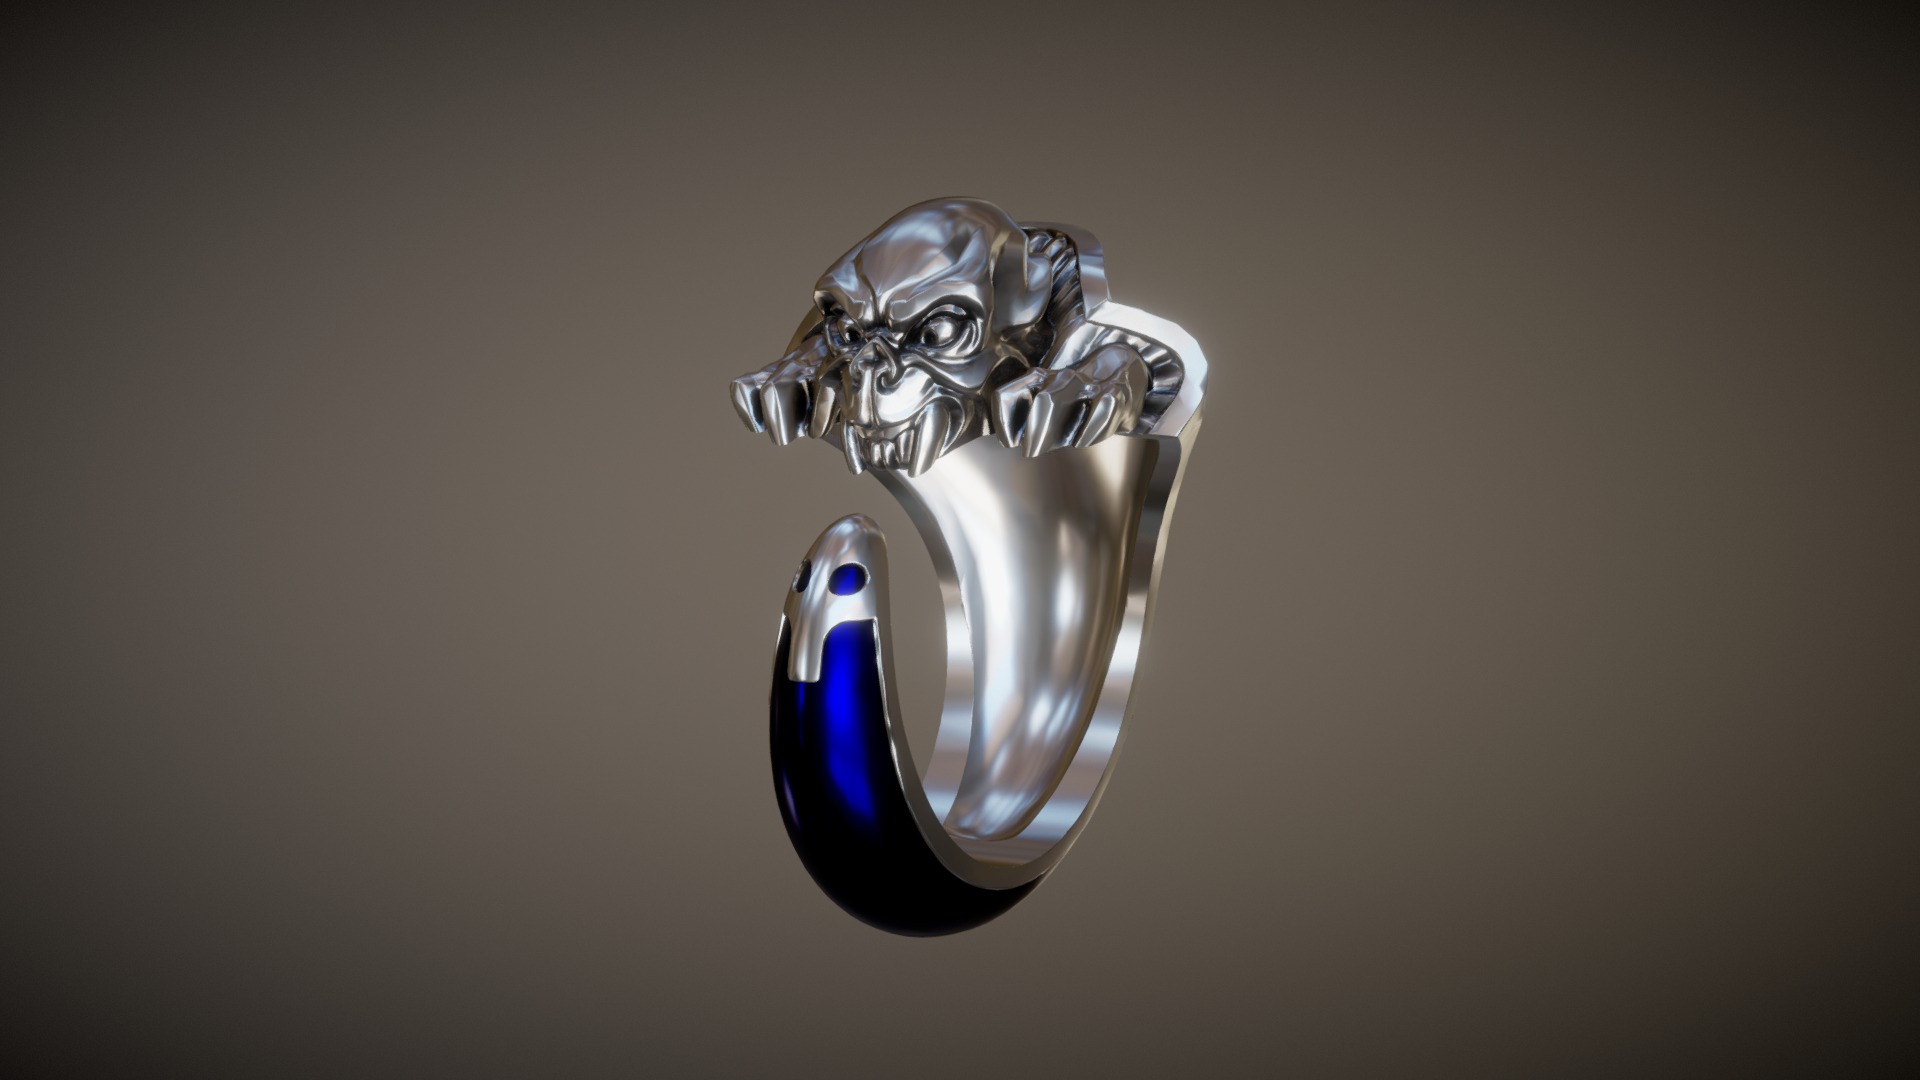 3D model Vampire Ring - This is a 3D model of the Vampire Ring. The 3D model is about a silver and blue ring.